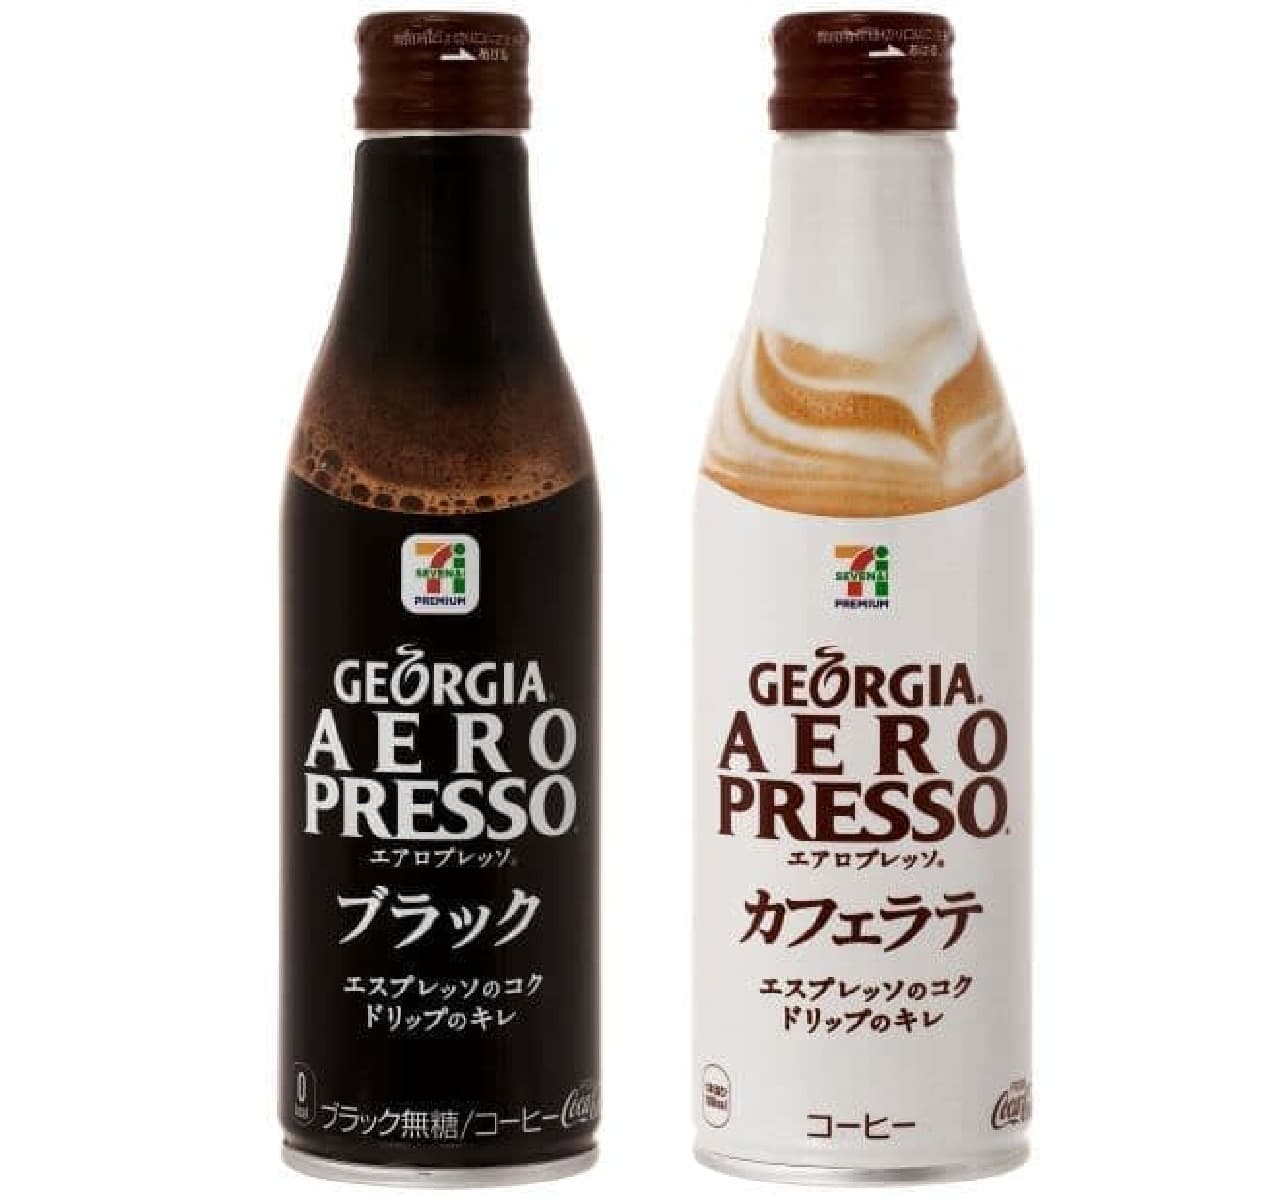 "Georgia Aeropresso" is a drink series that uses the "aeropresso manufacturing method".